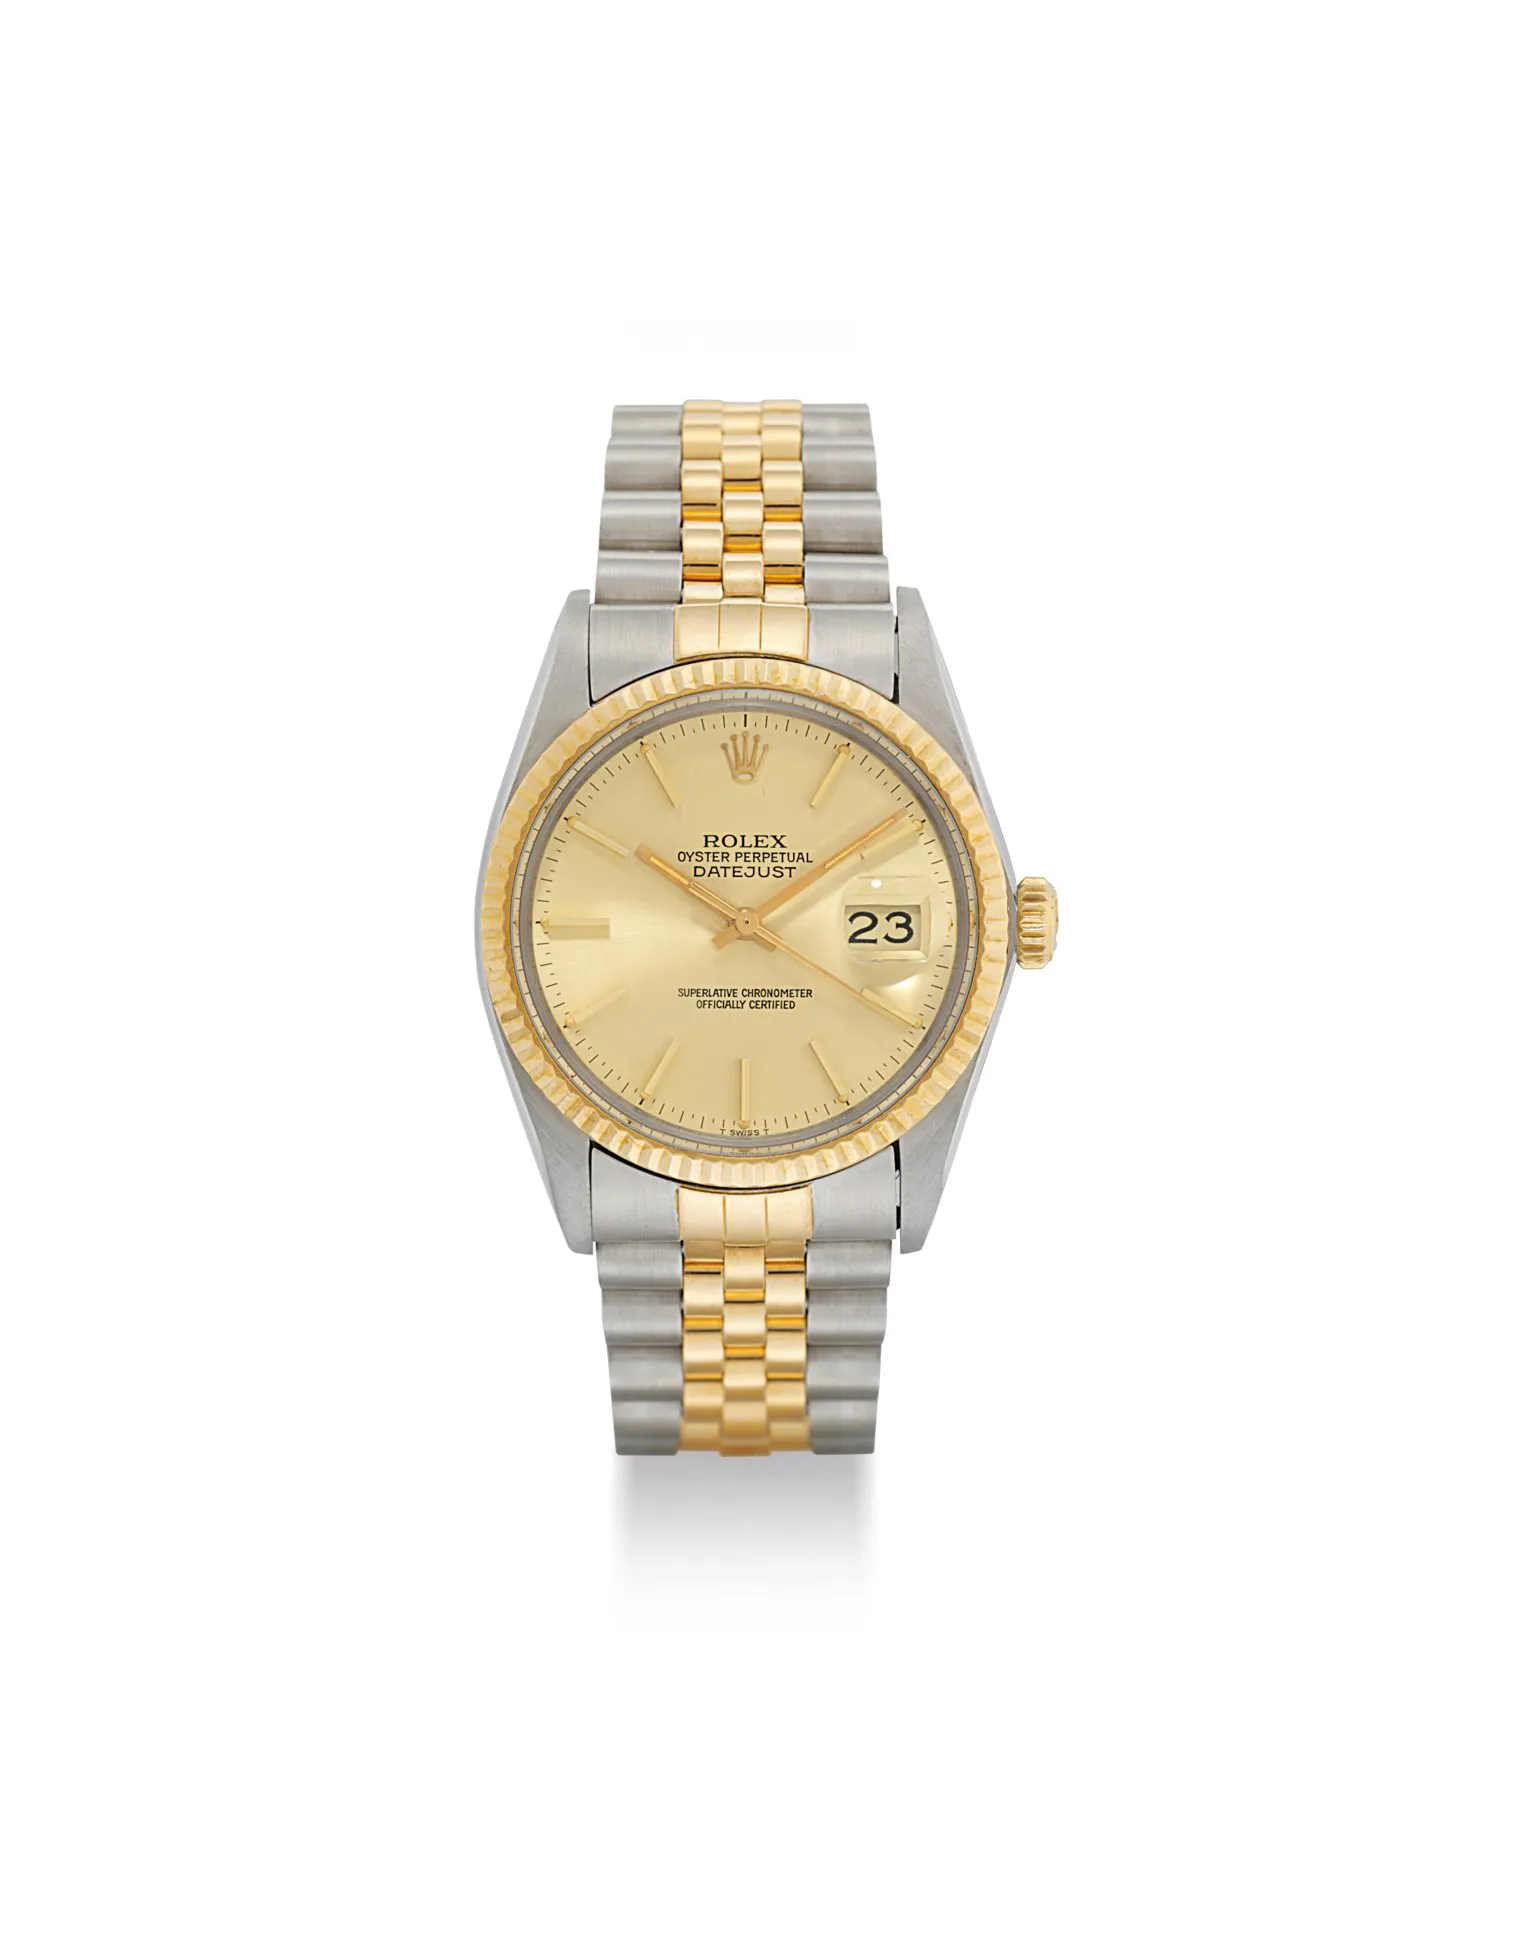 Rolex Datejust 36 16013 34mm Stainless steel and gold Gold